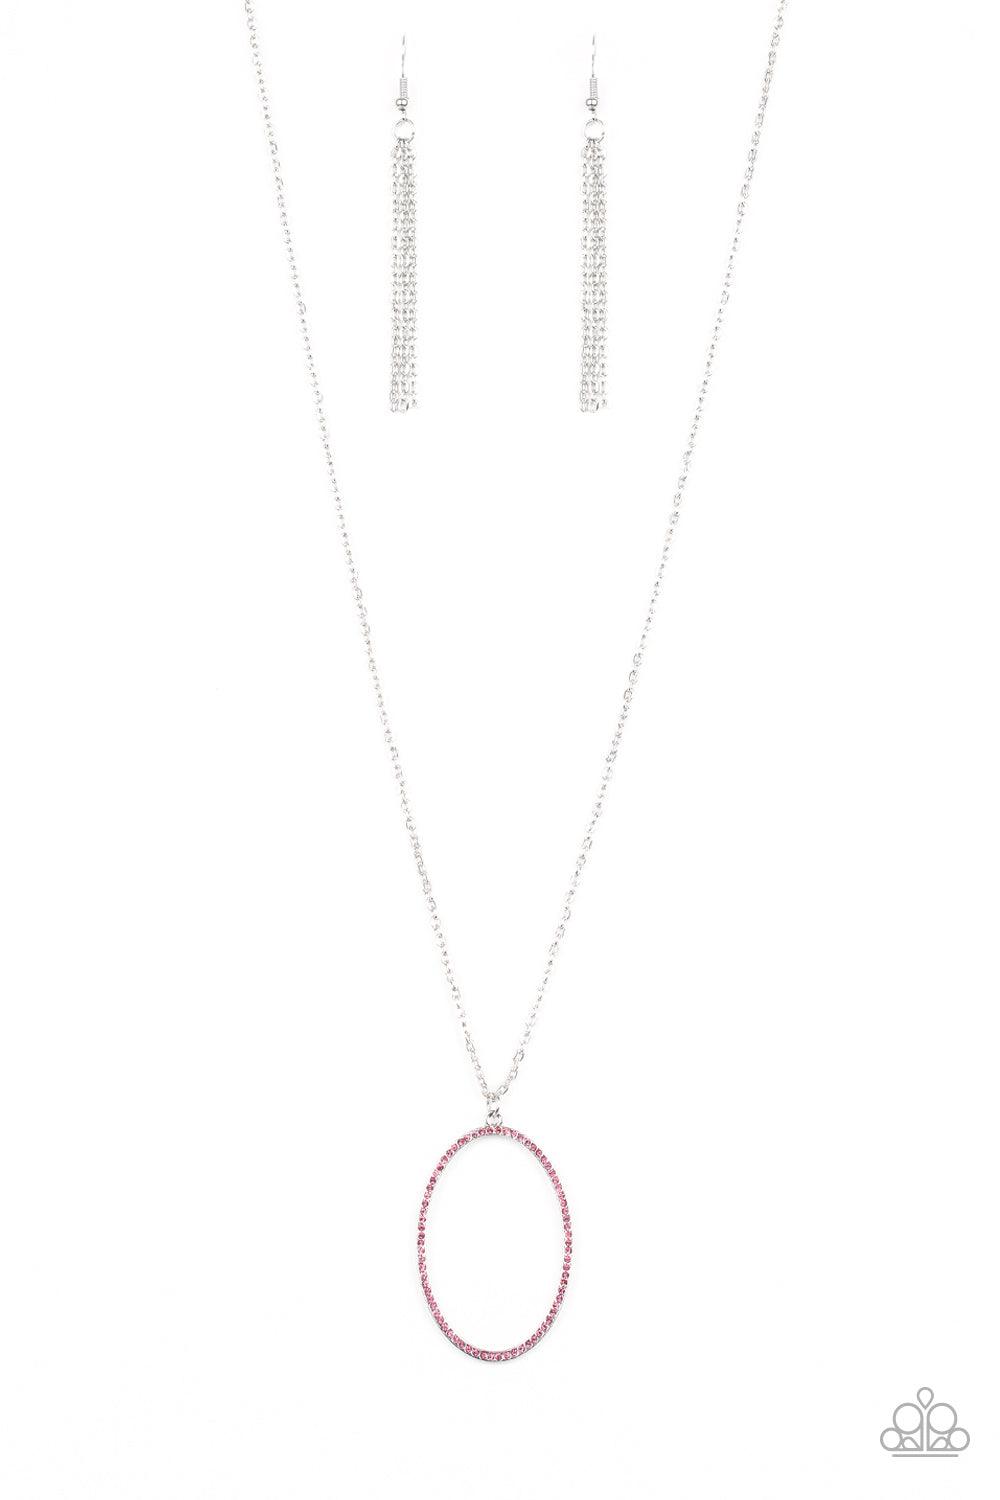 Paparazzi Accessories A Dazzling Distraction - Pink Encrusted in glassy pink rhinestones, an airy silver hoop swings from the bottom of a lengthened silver chain for a refined flair. Features an adjustable clasp closure. Sold as one individual necklace. I